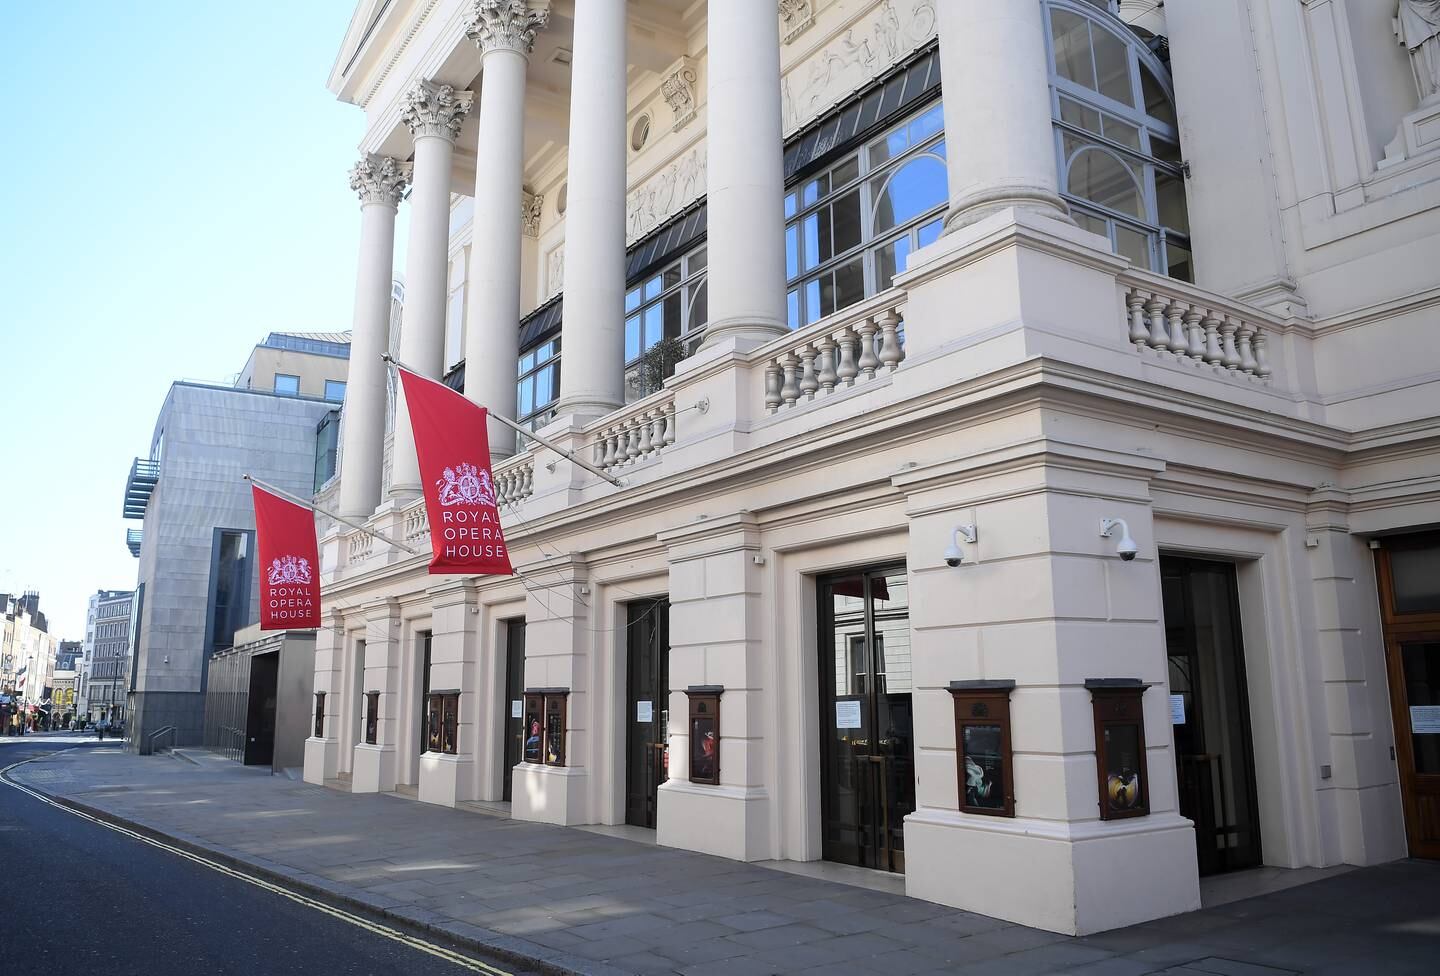 Not many people can step out of their front door and into the Royal Opera House. Getty Images 